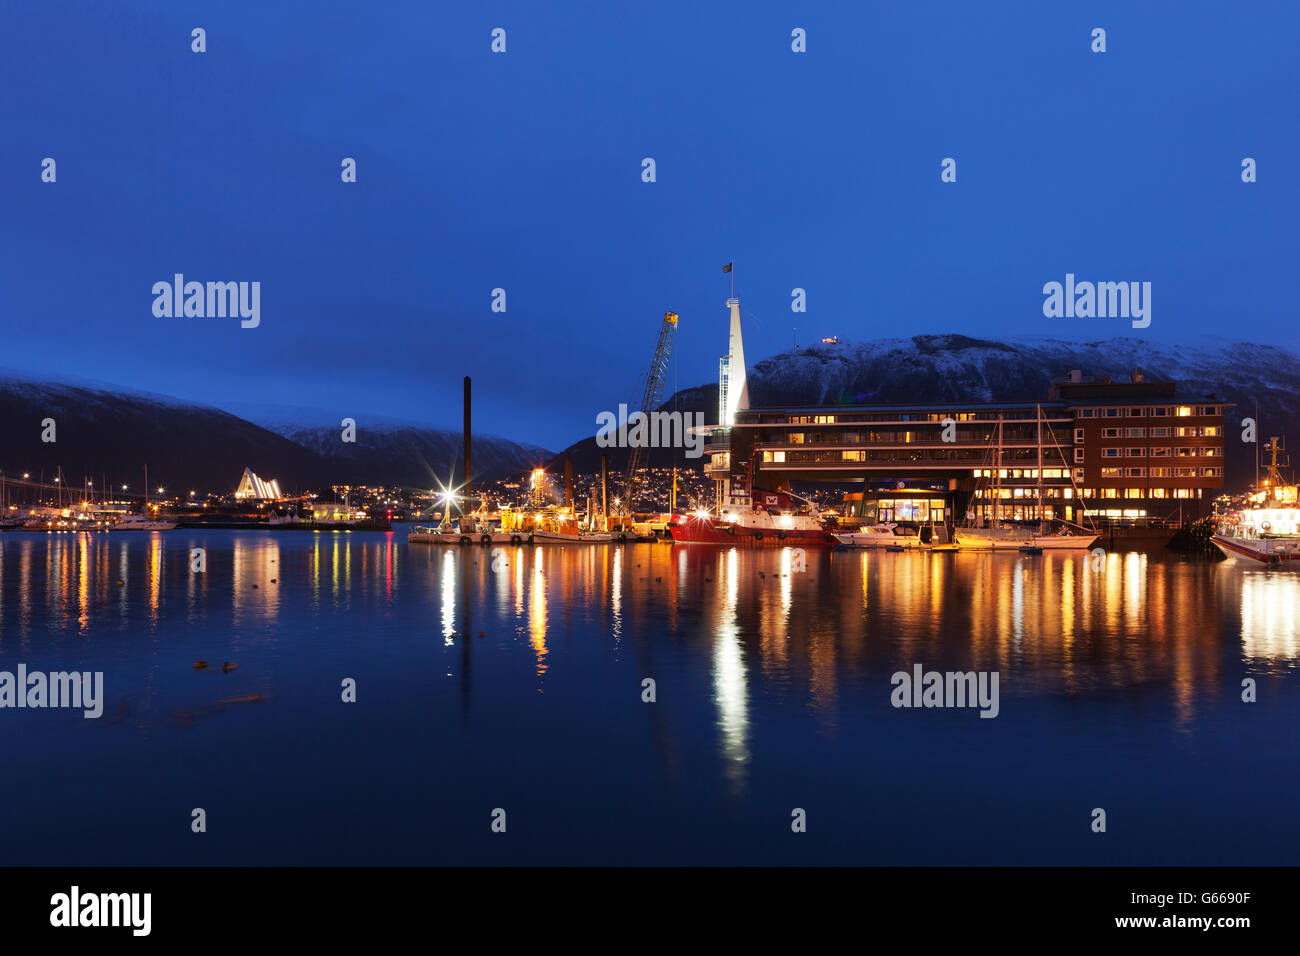 Night view of part of the harbour area of Tromsø, Tromso, showing the Ishavshotel and Tromsdalen Church, Arctic Cathedral or Stock Photo